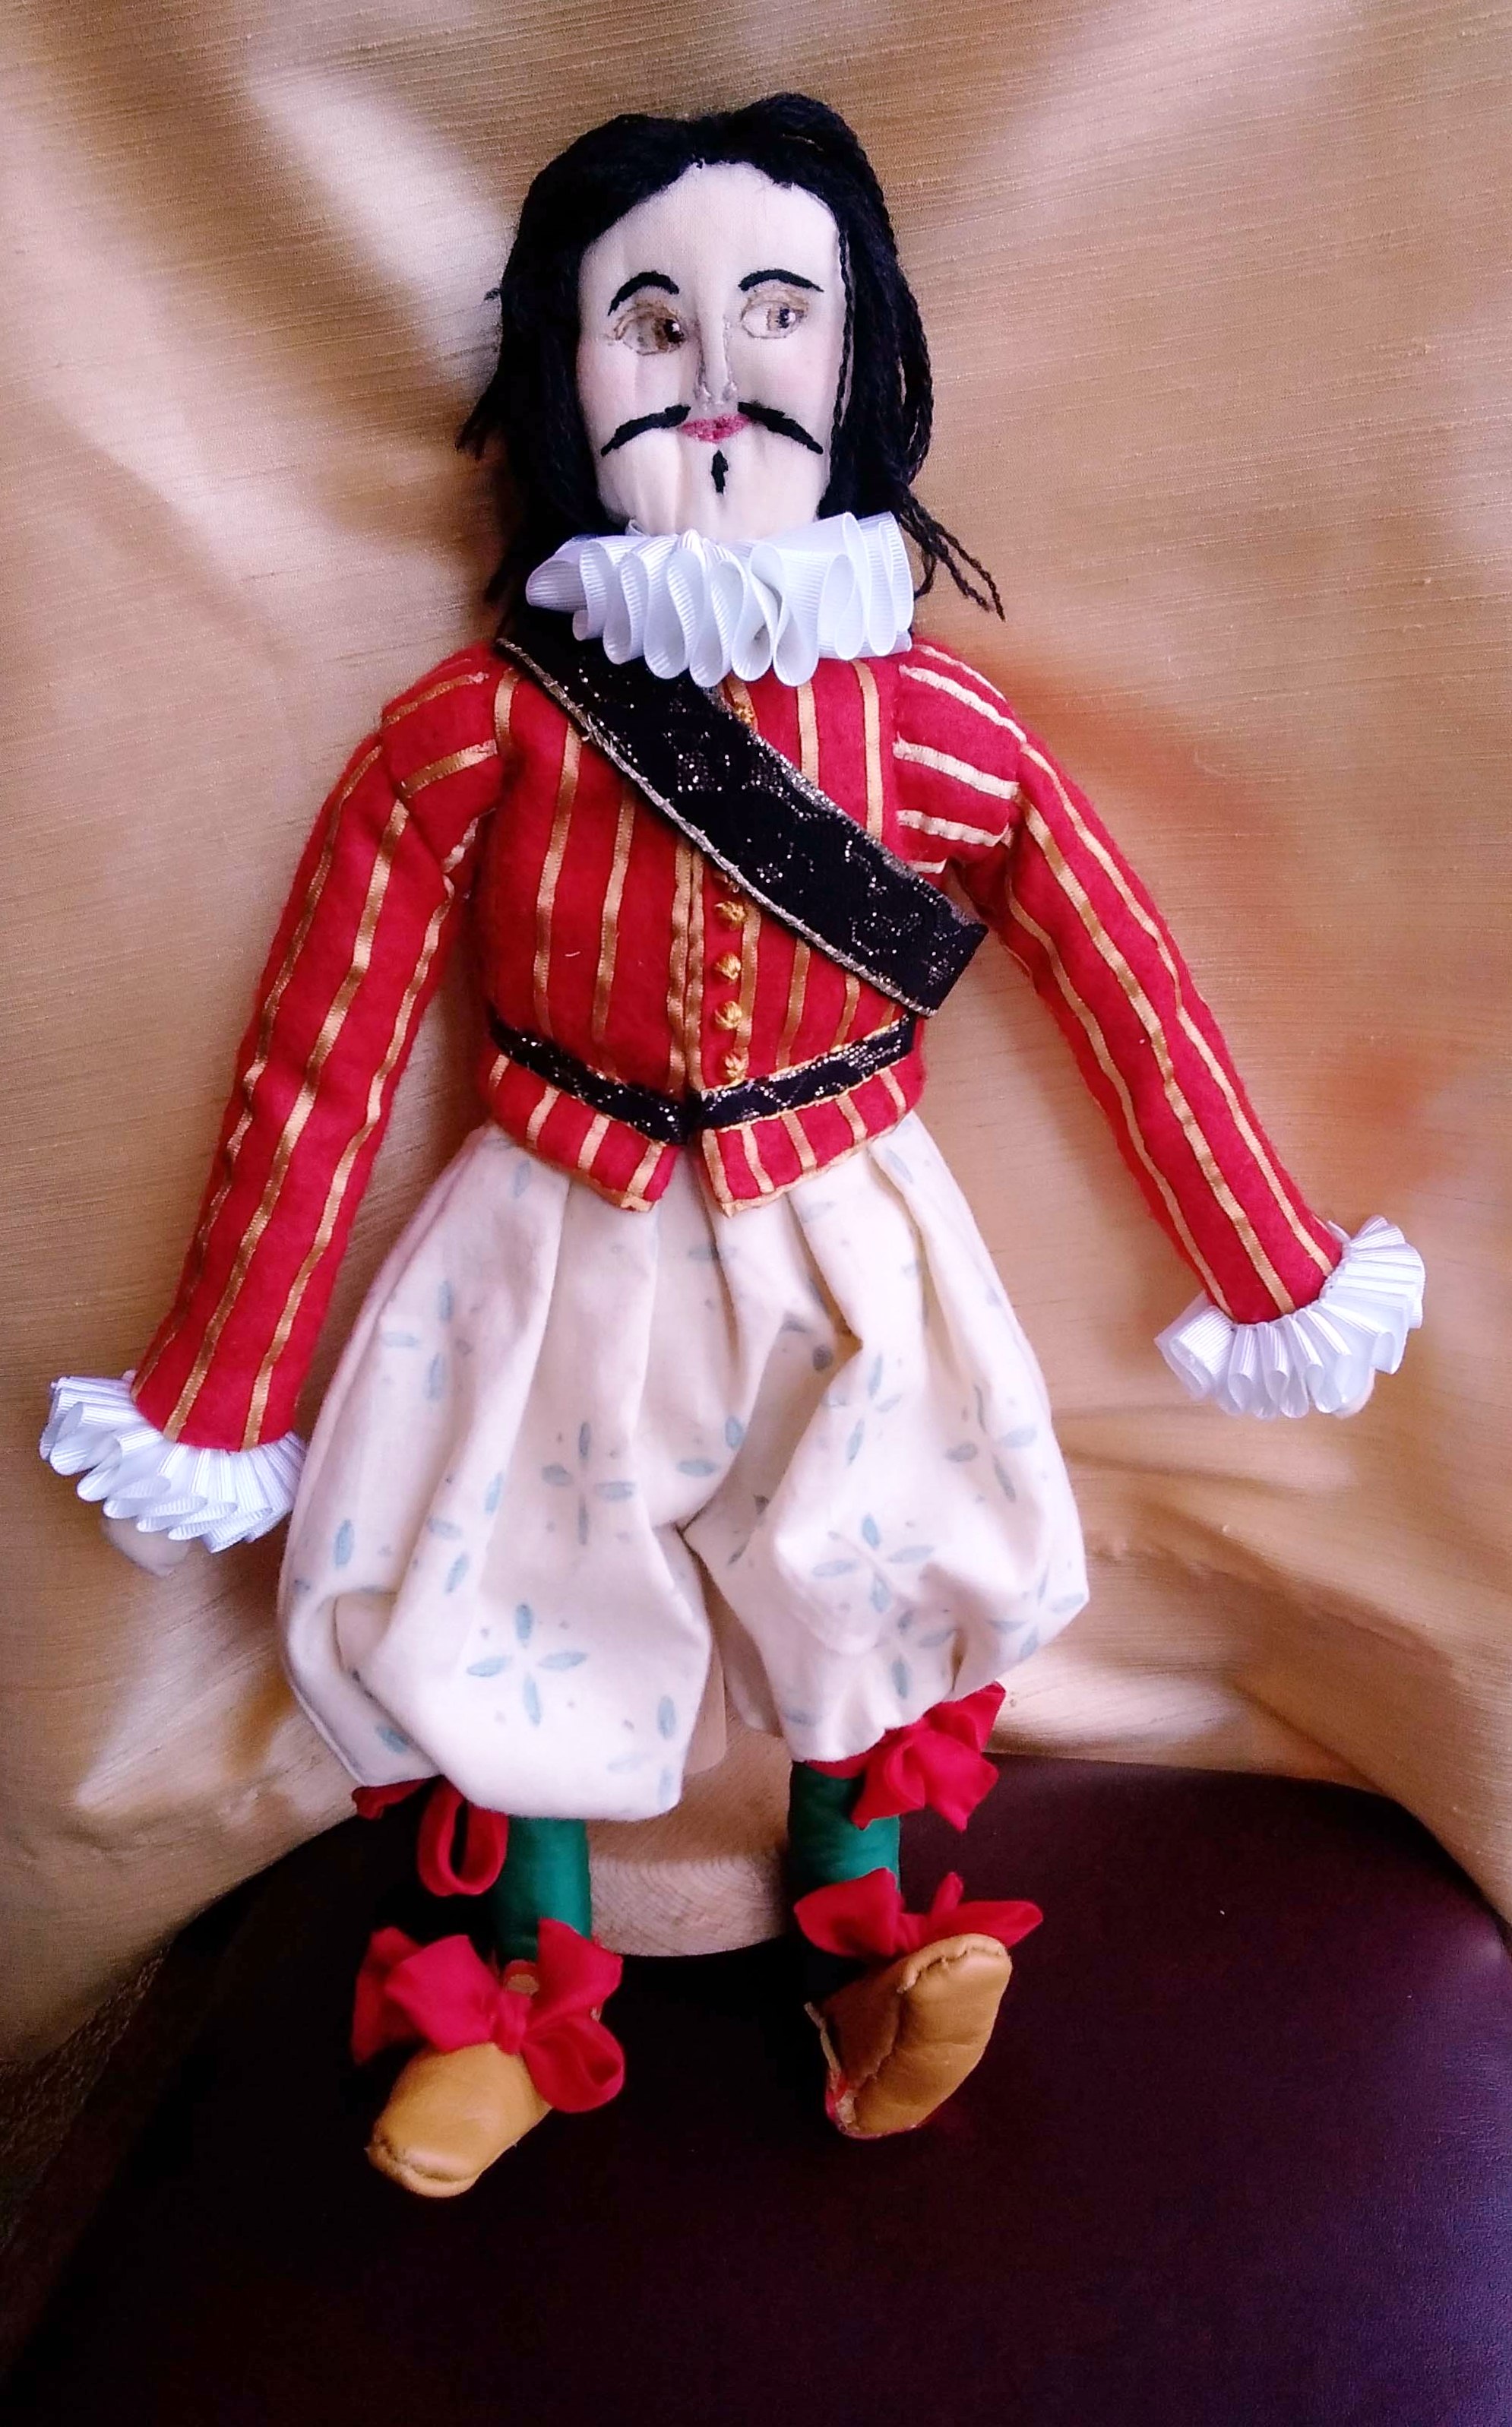 THE CHILDE OF HALE by Brenda Muller, 3D doll from the portrait in Speke Great Hall, MEG display at NW Regional Day 2021